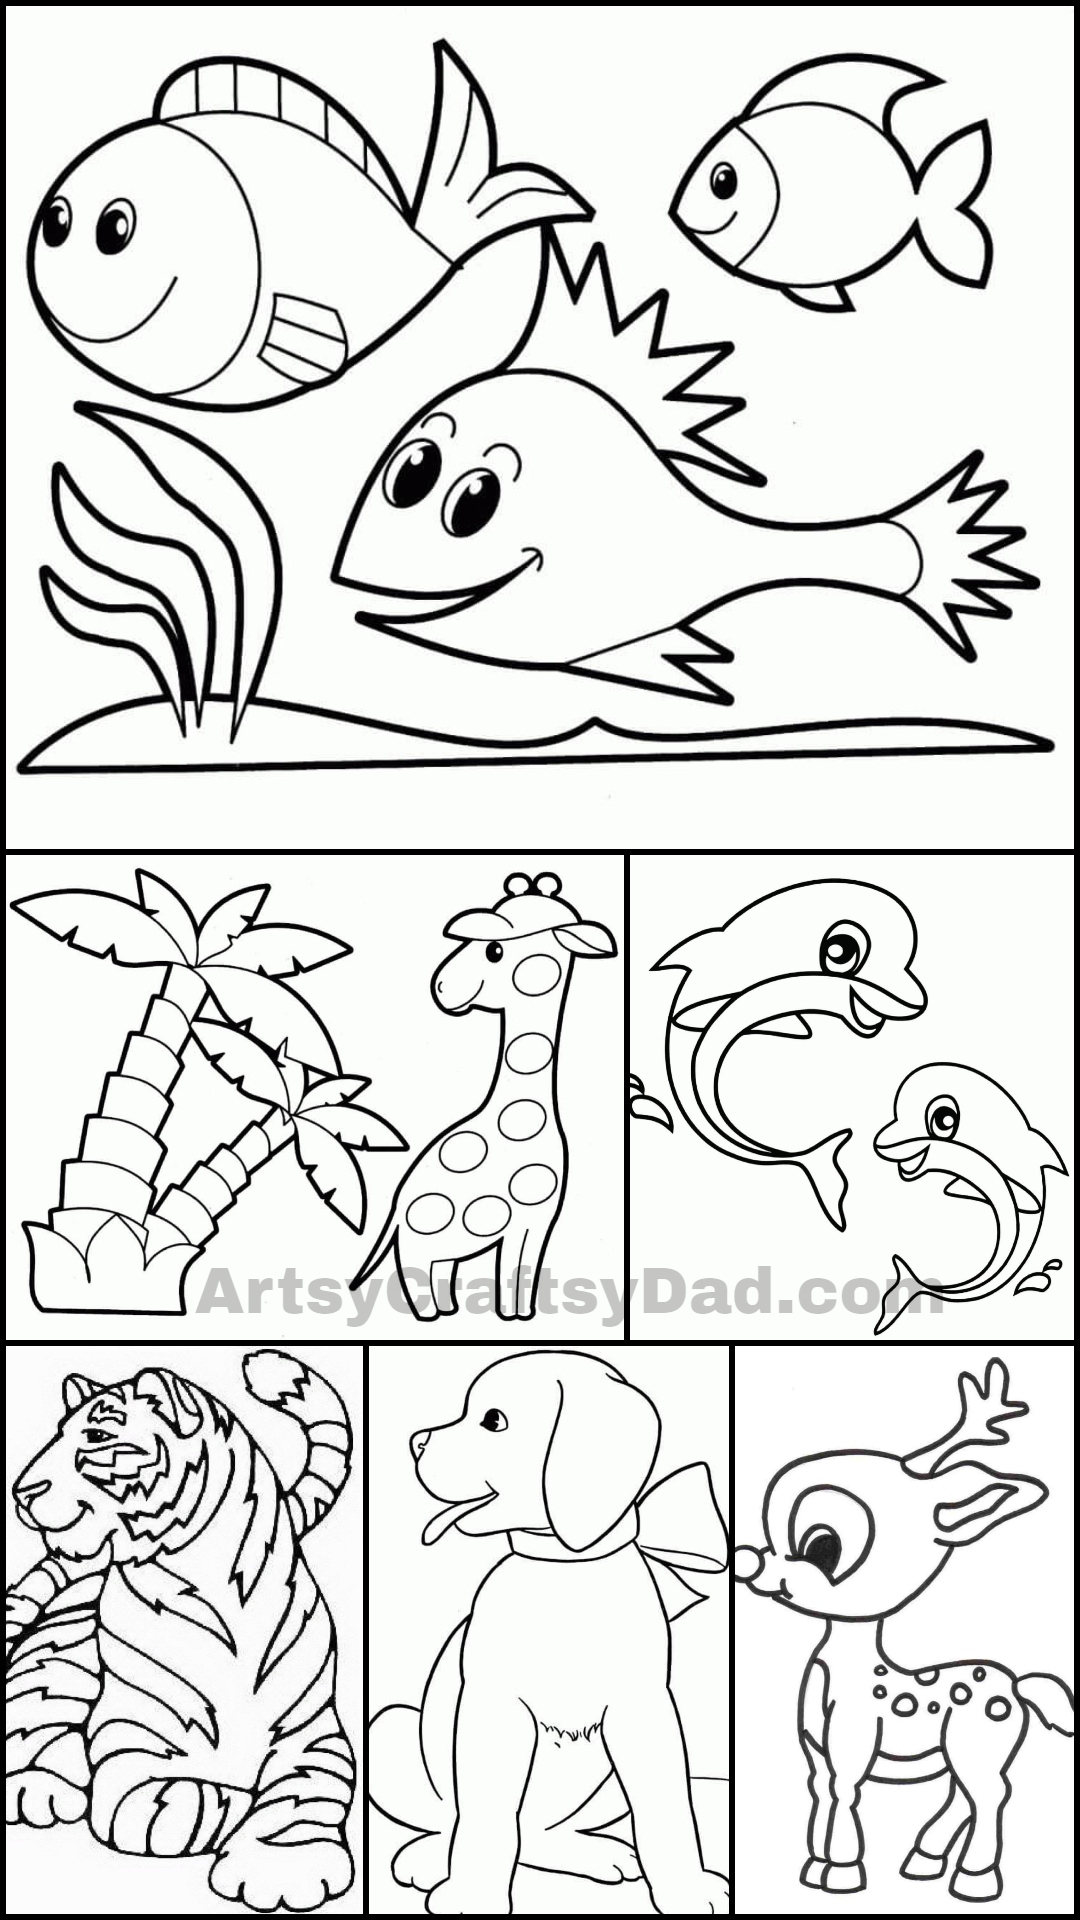 Free Printable Animal Coloring Pages for Kids